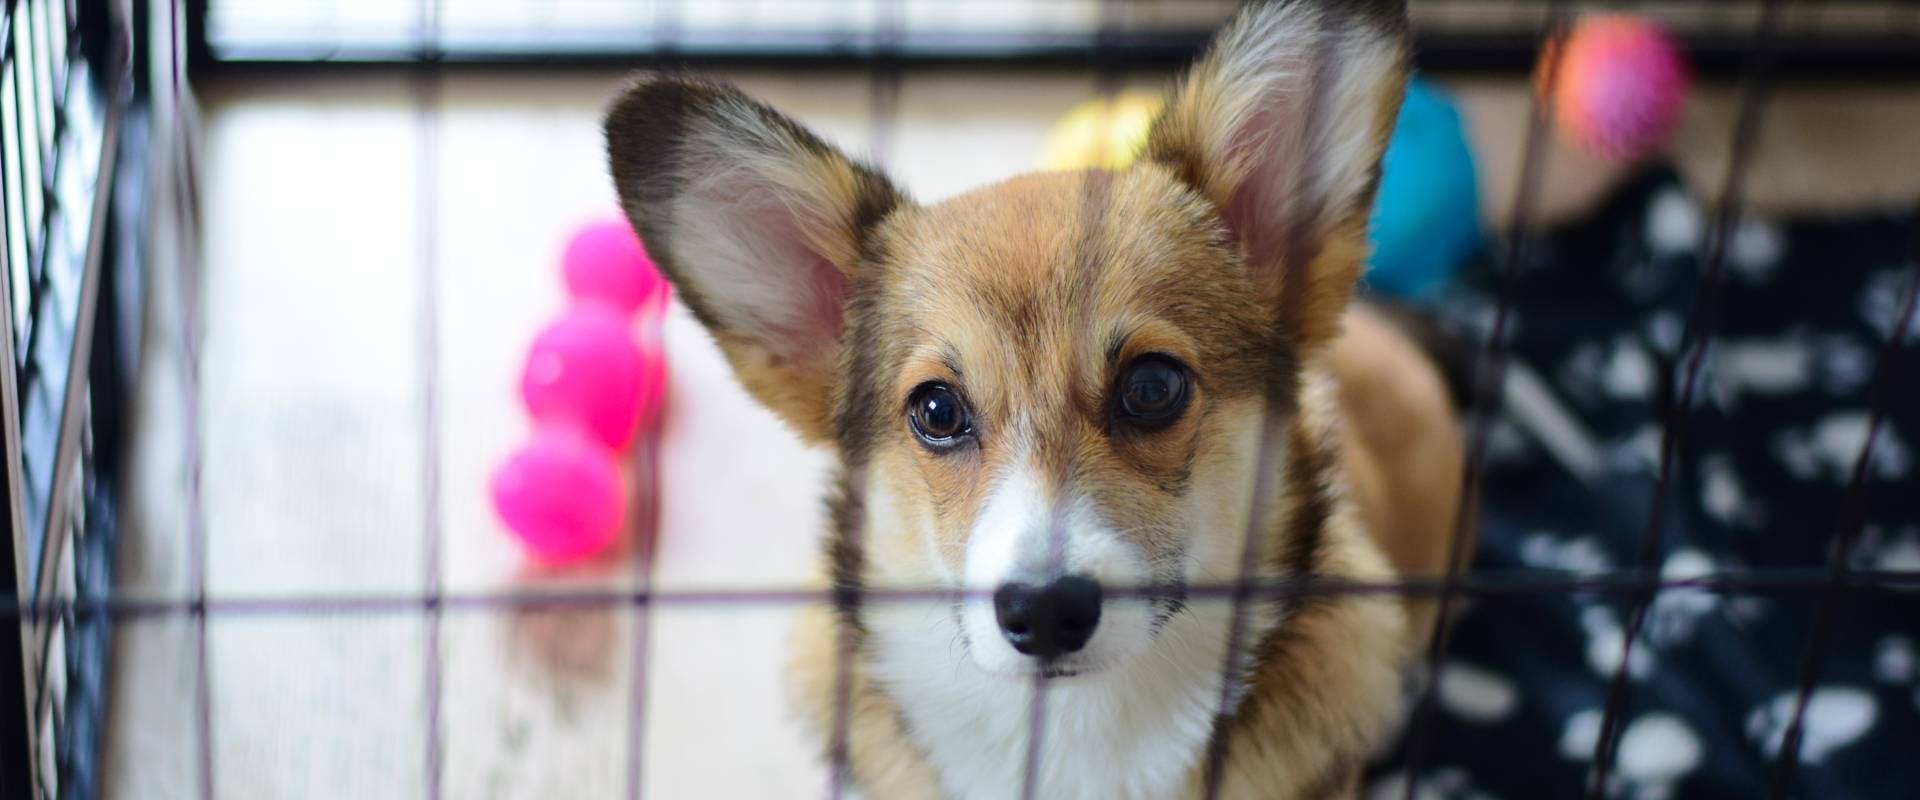 a adult dog corgi sat in a comfy crate looking out through the bars